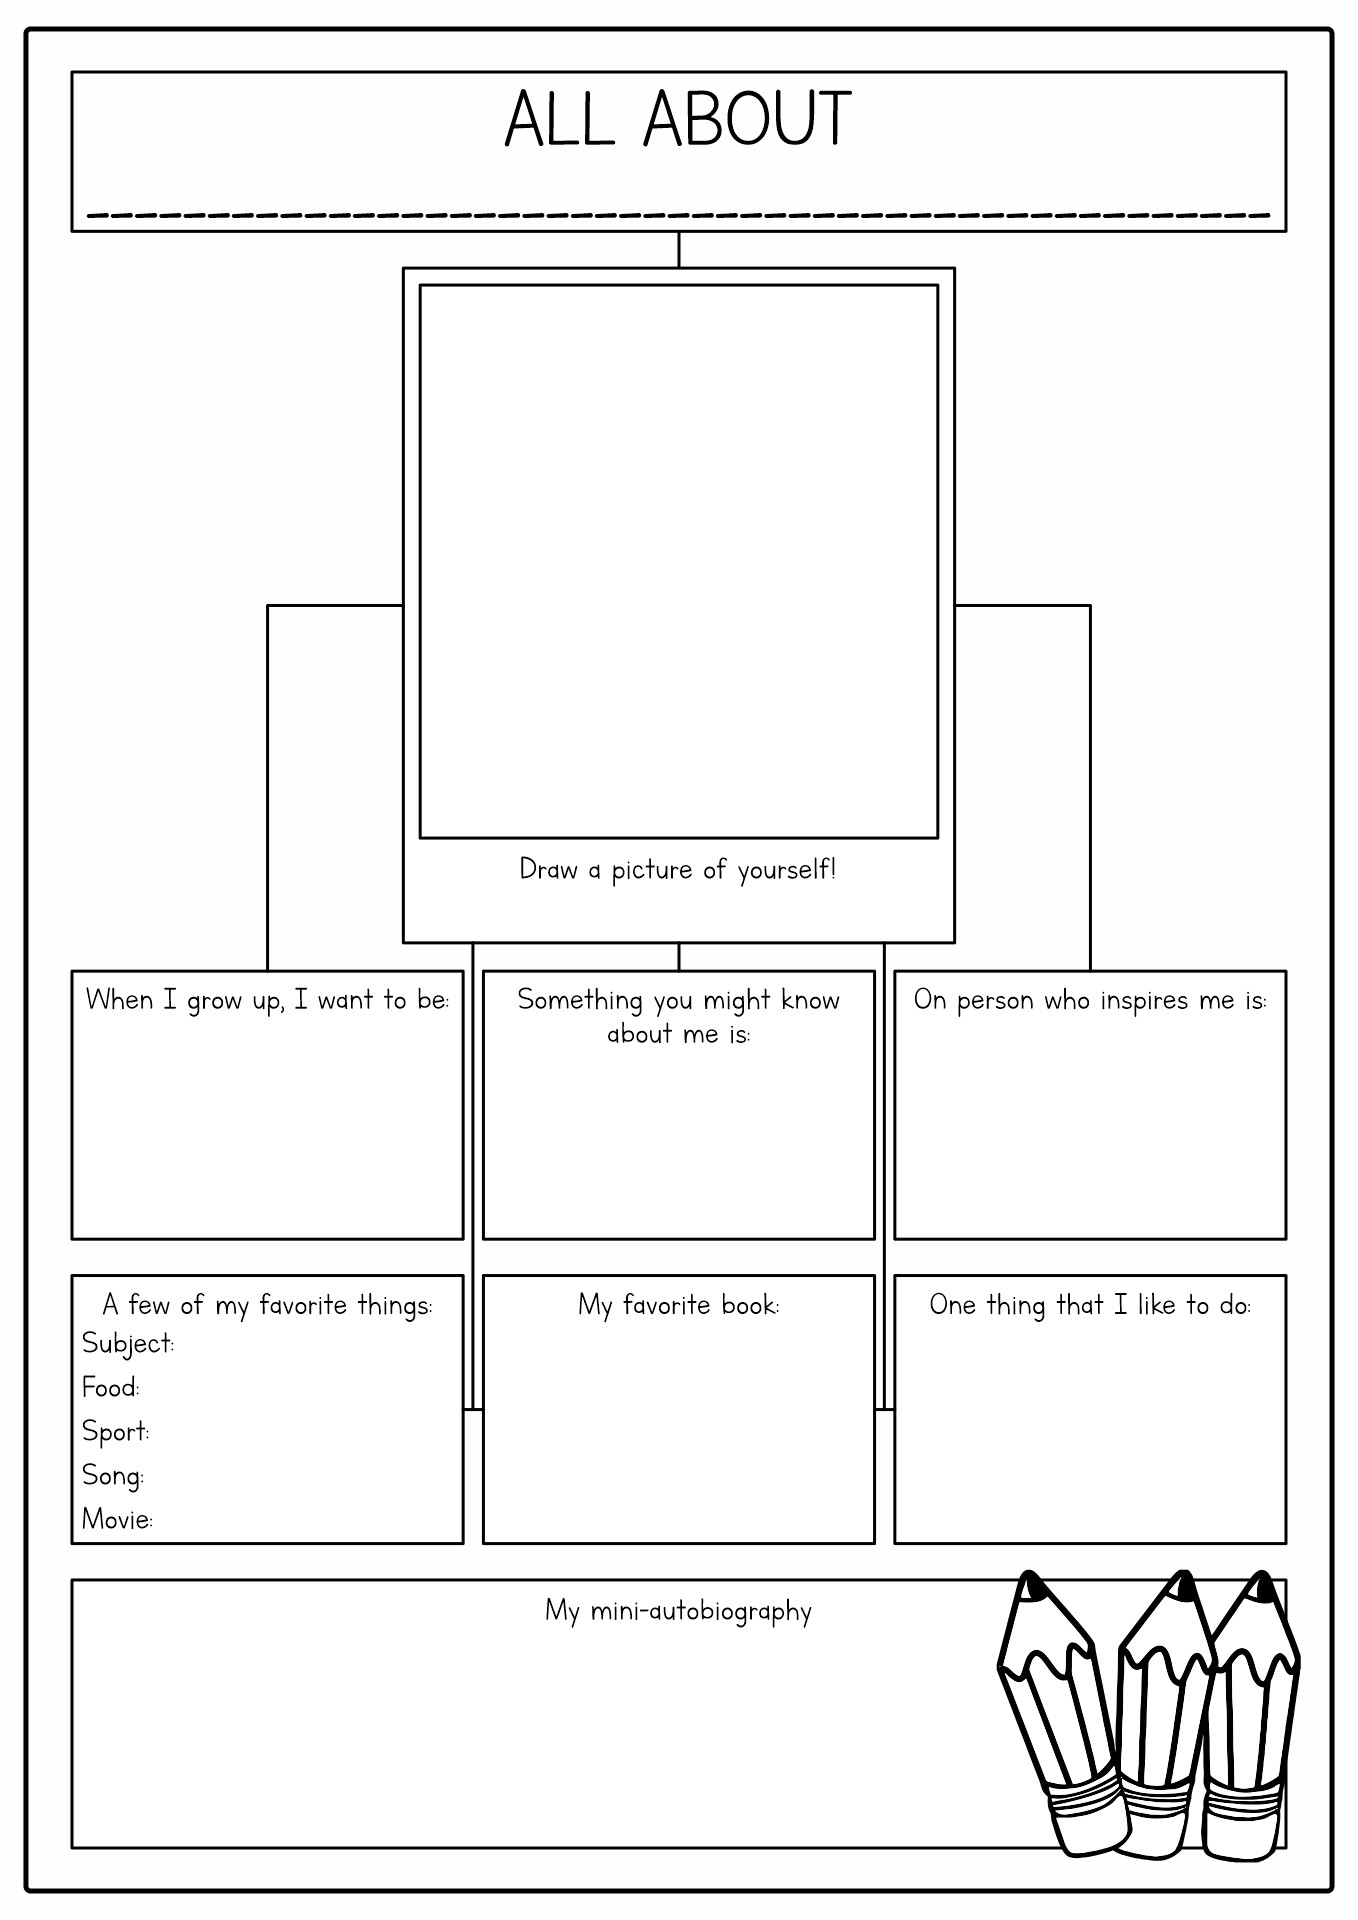 All About Me Graphic Organizer Image